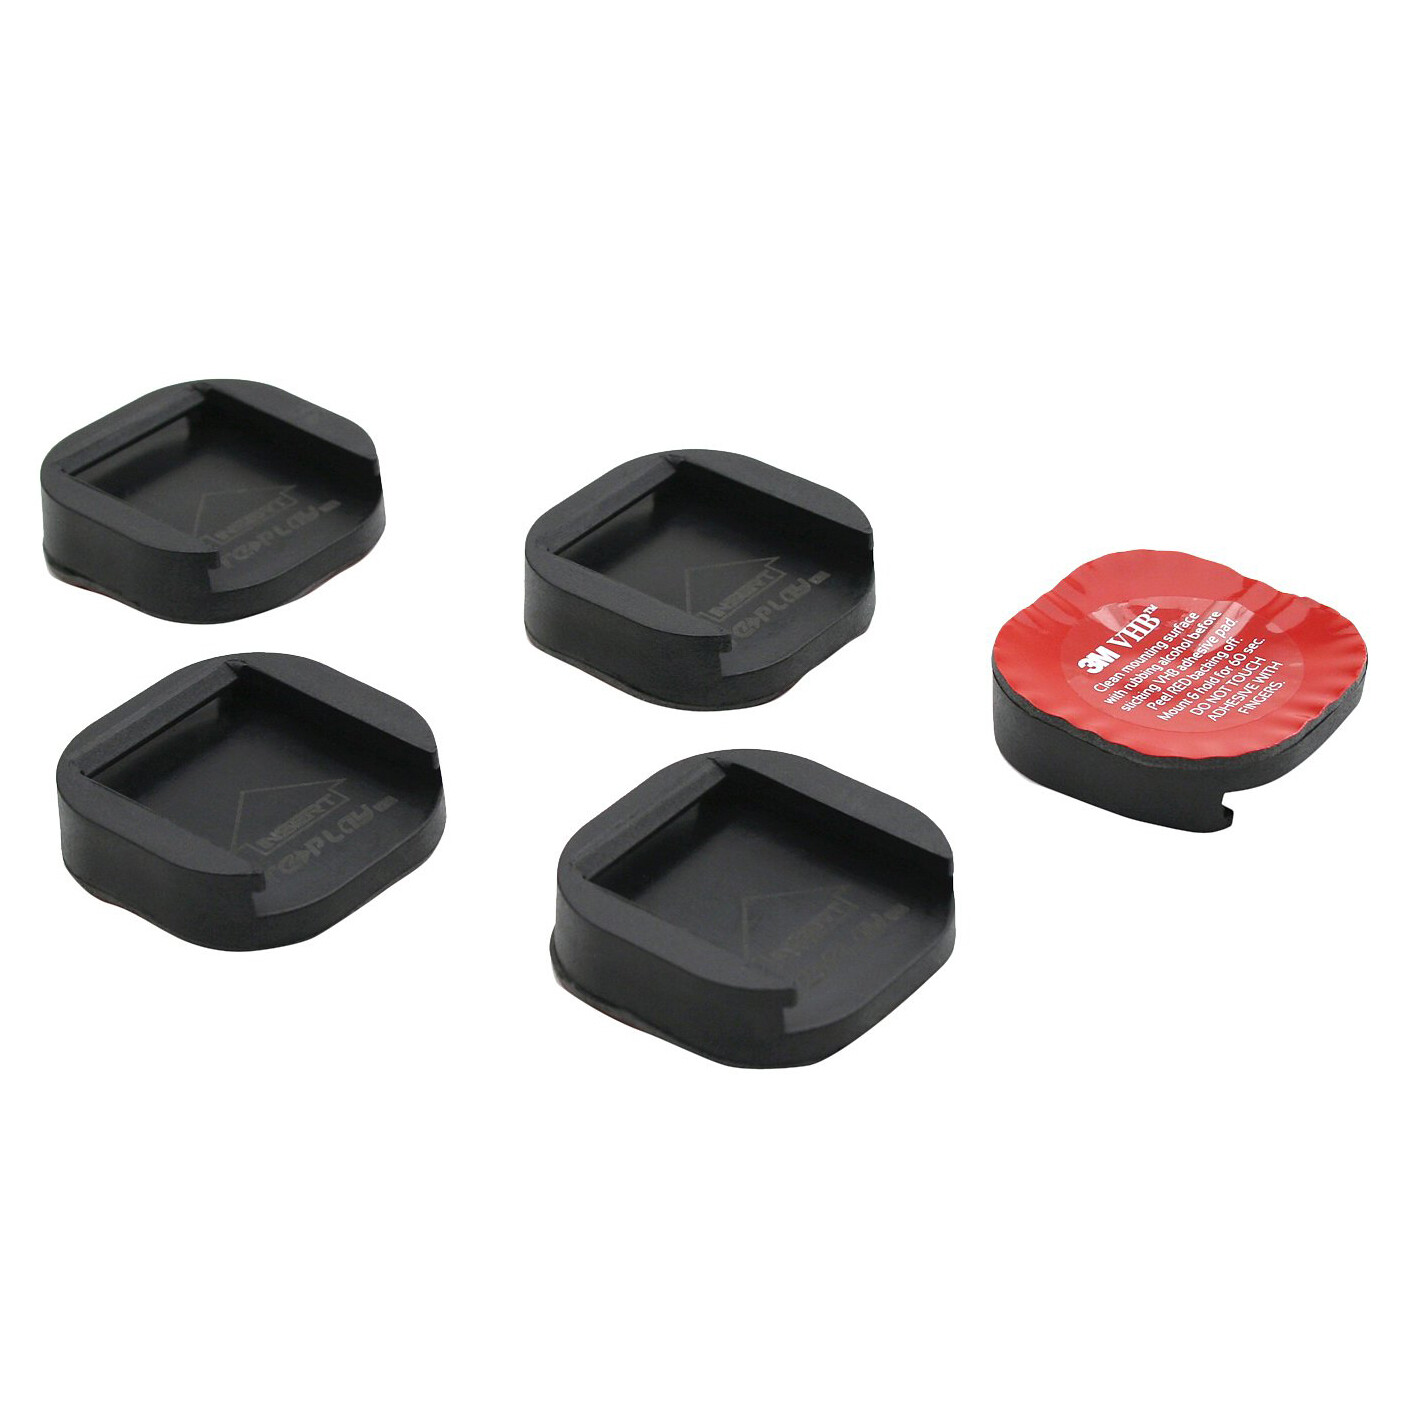 Replay XD Snap Tray Convex - 5 Pack